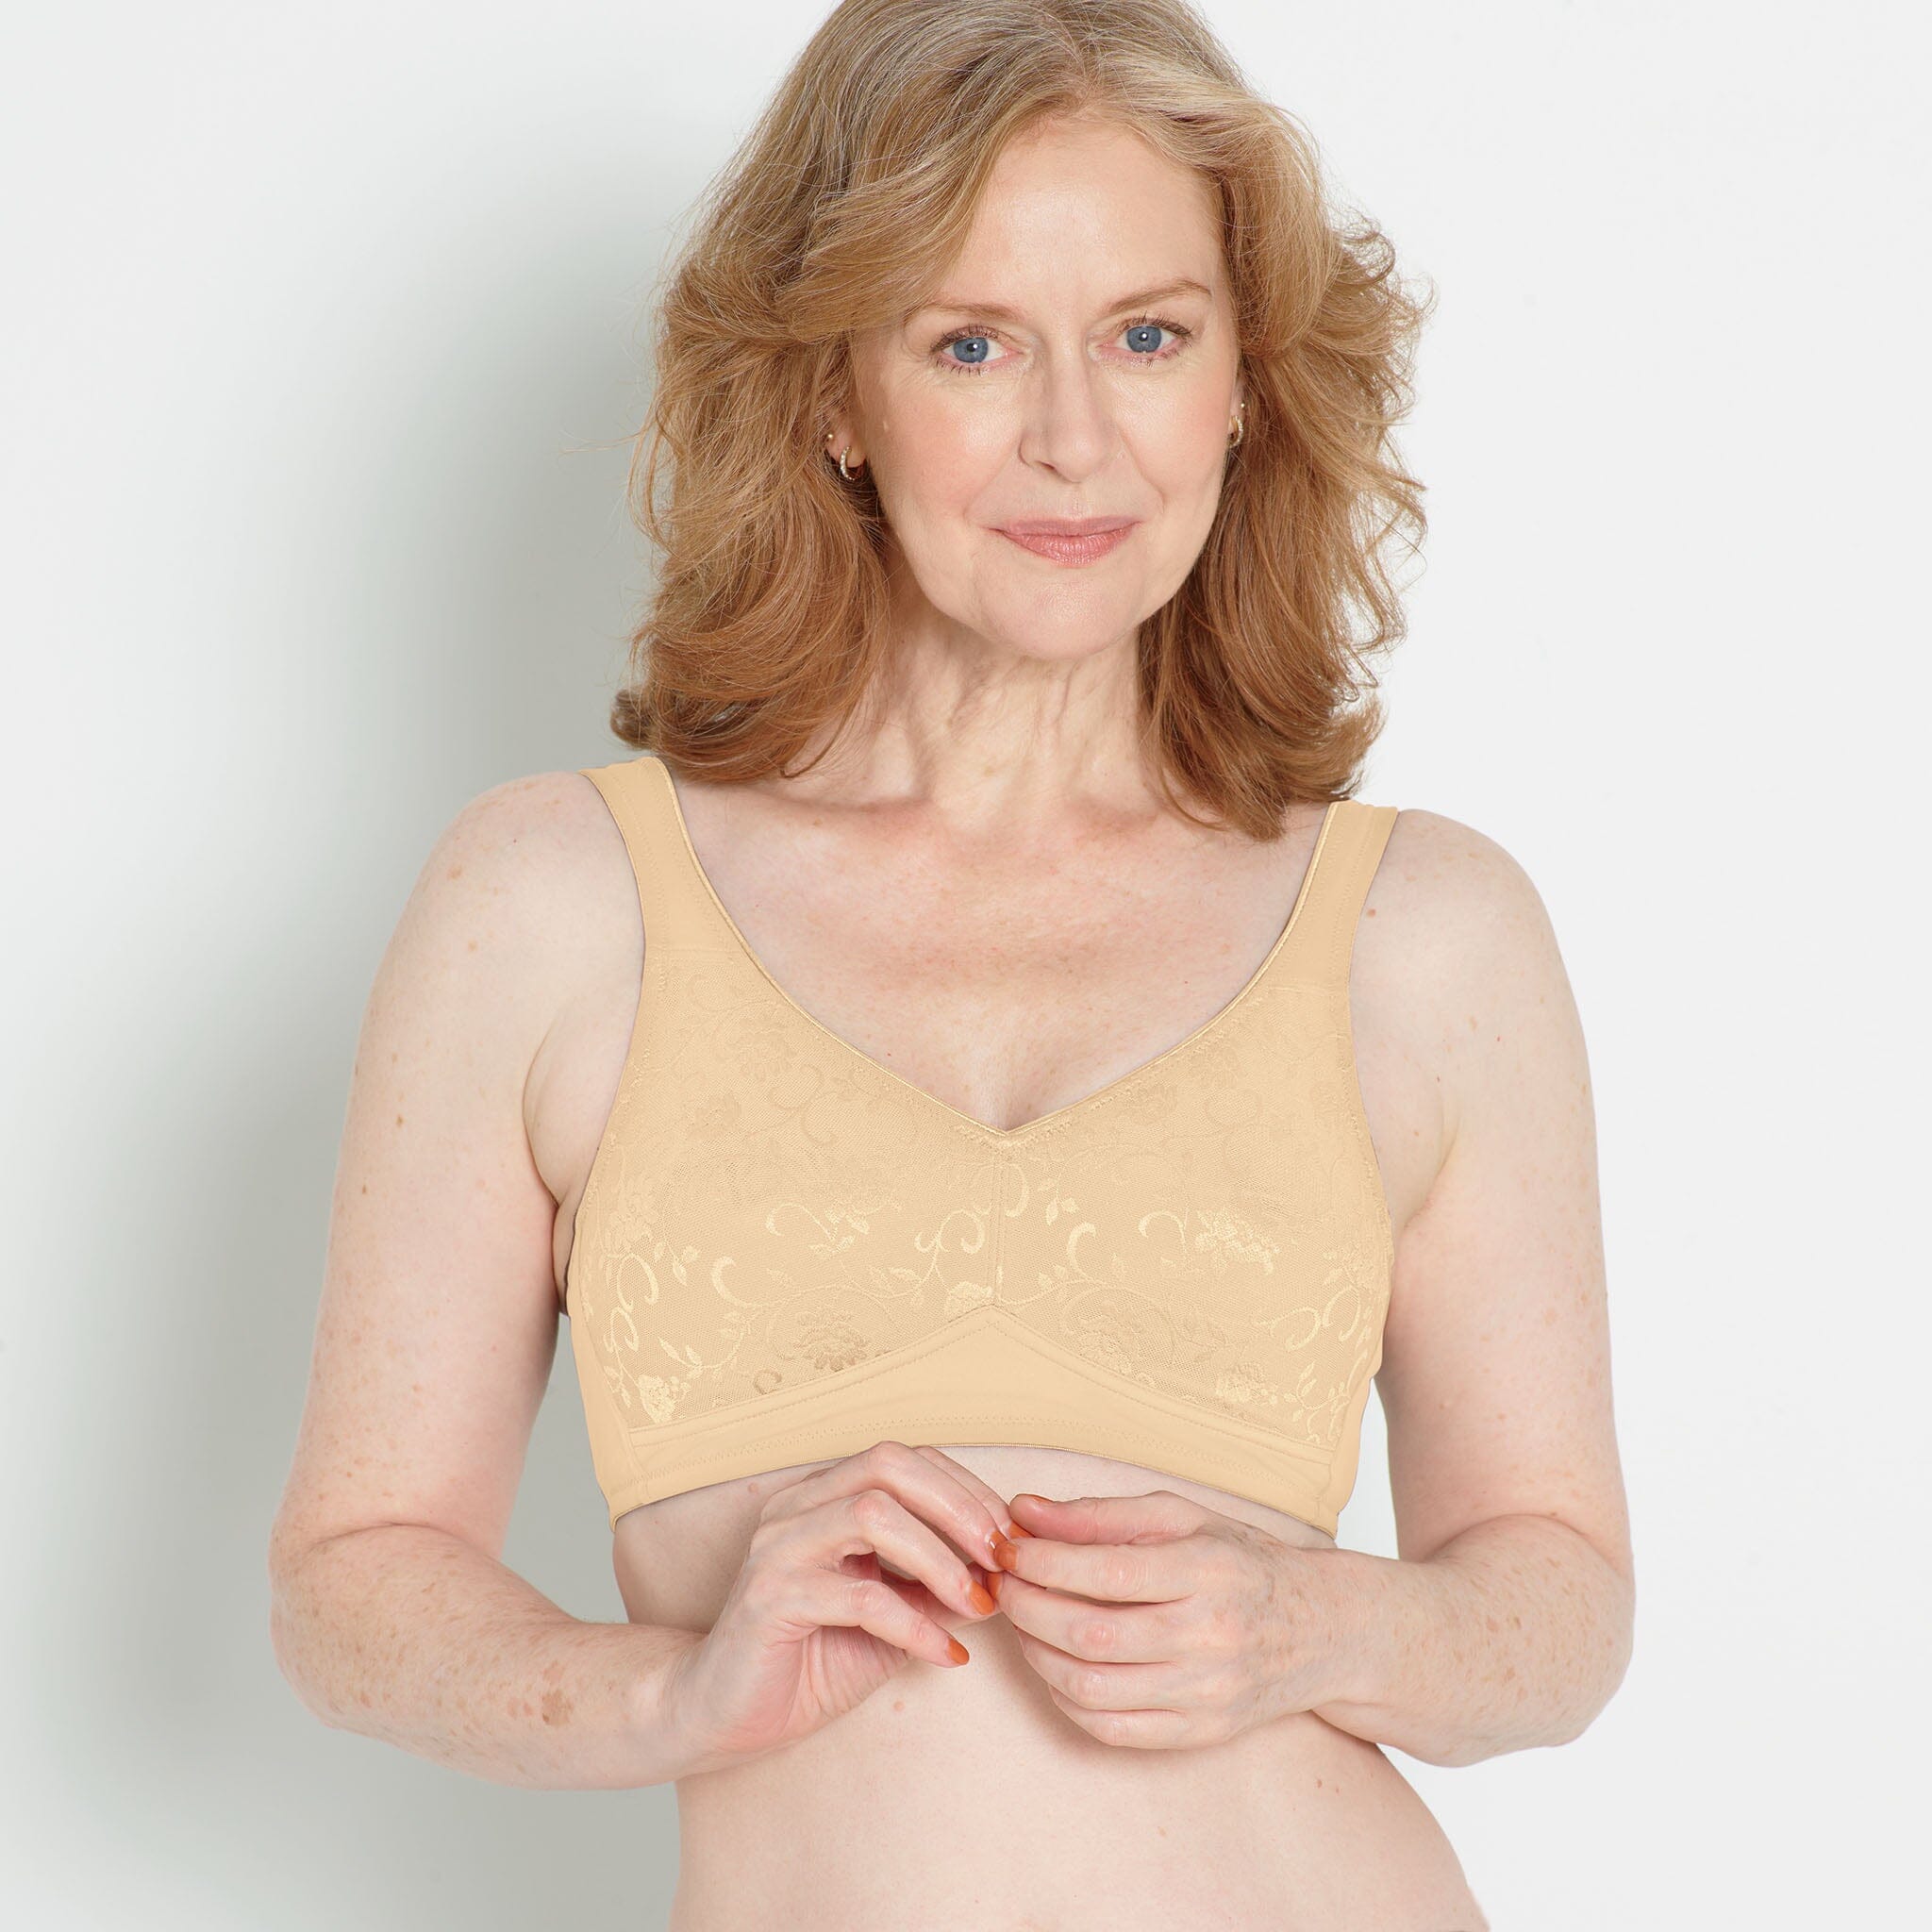 Look Beautiful With Complete Shaping Bilateral Mastectomy Apparel